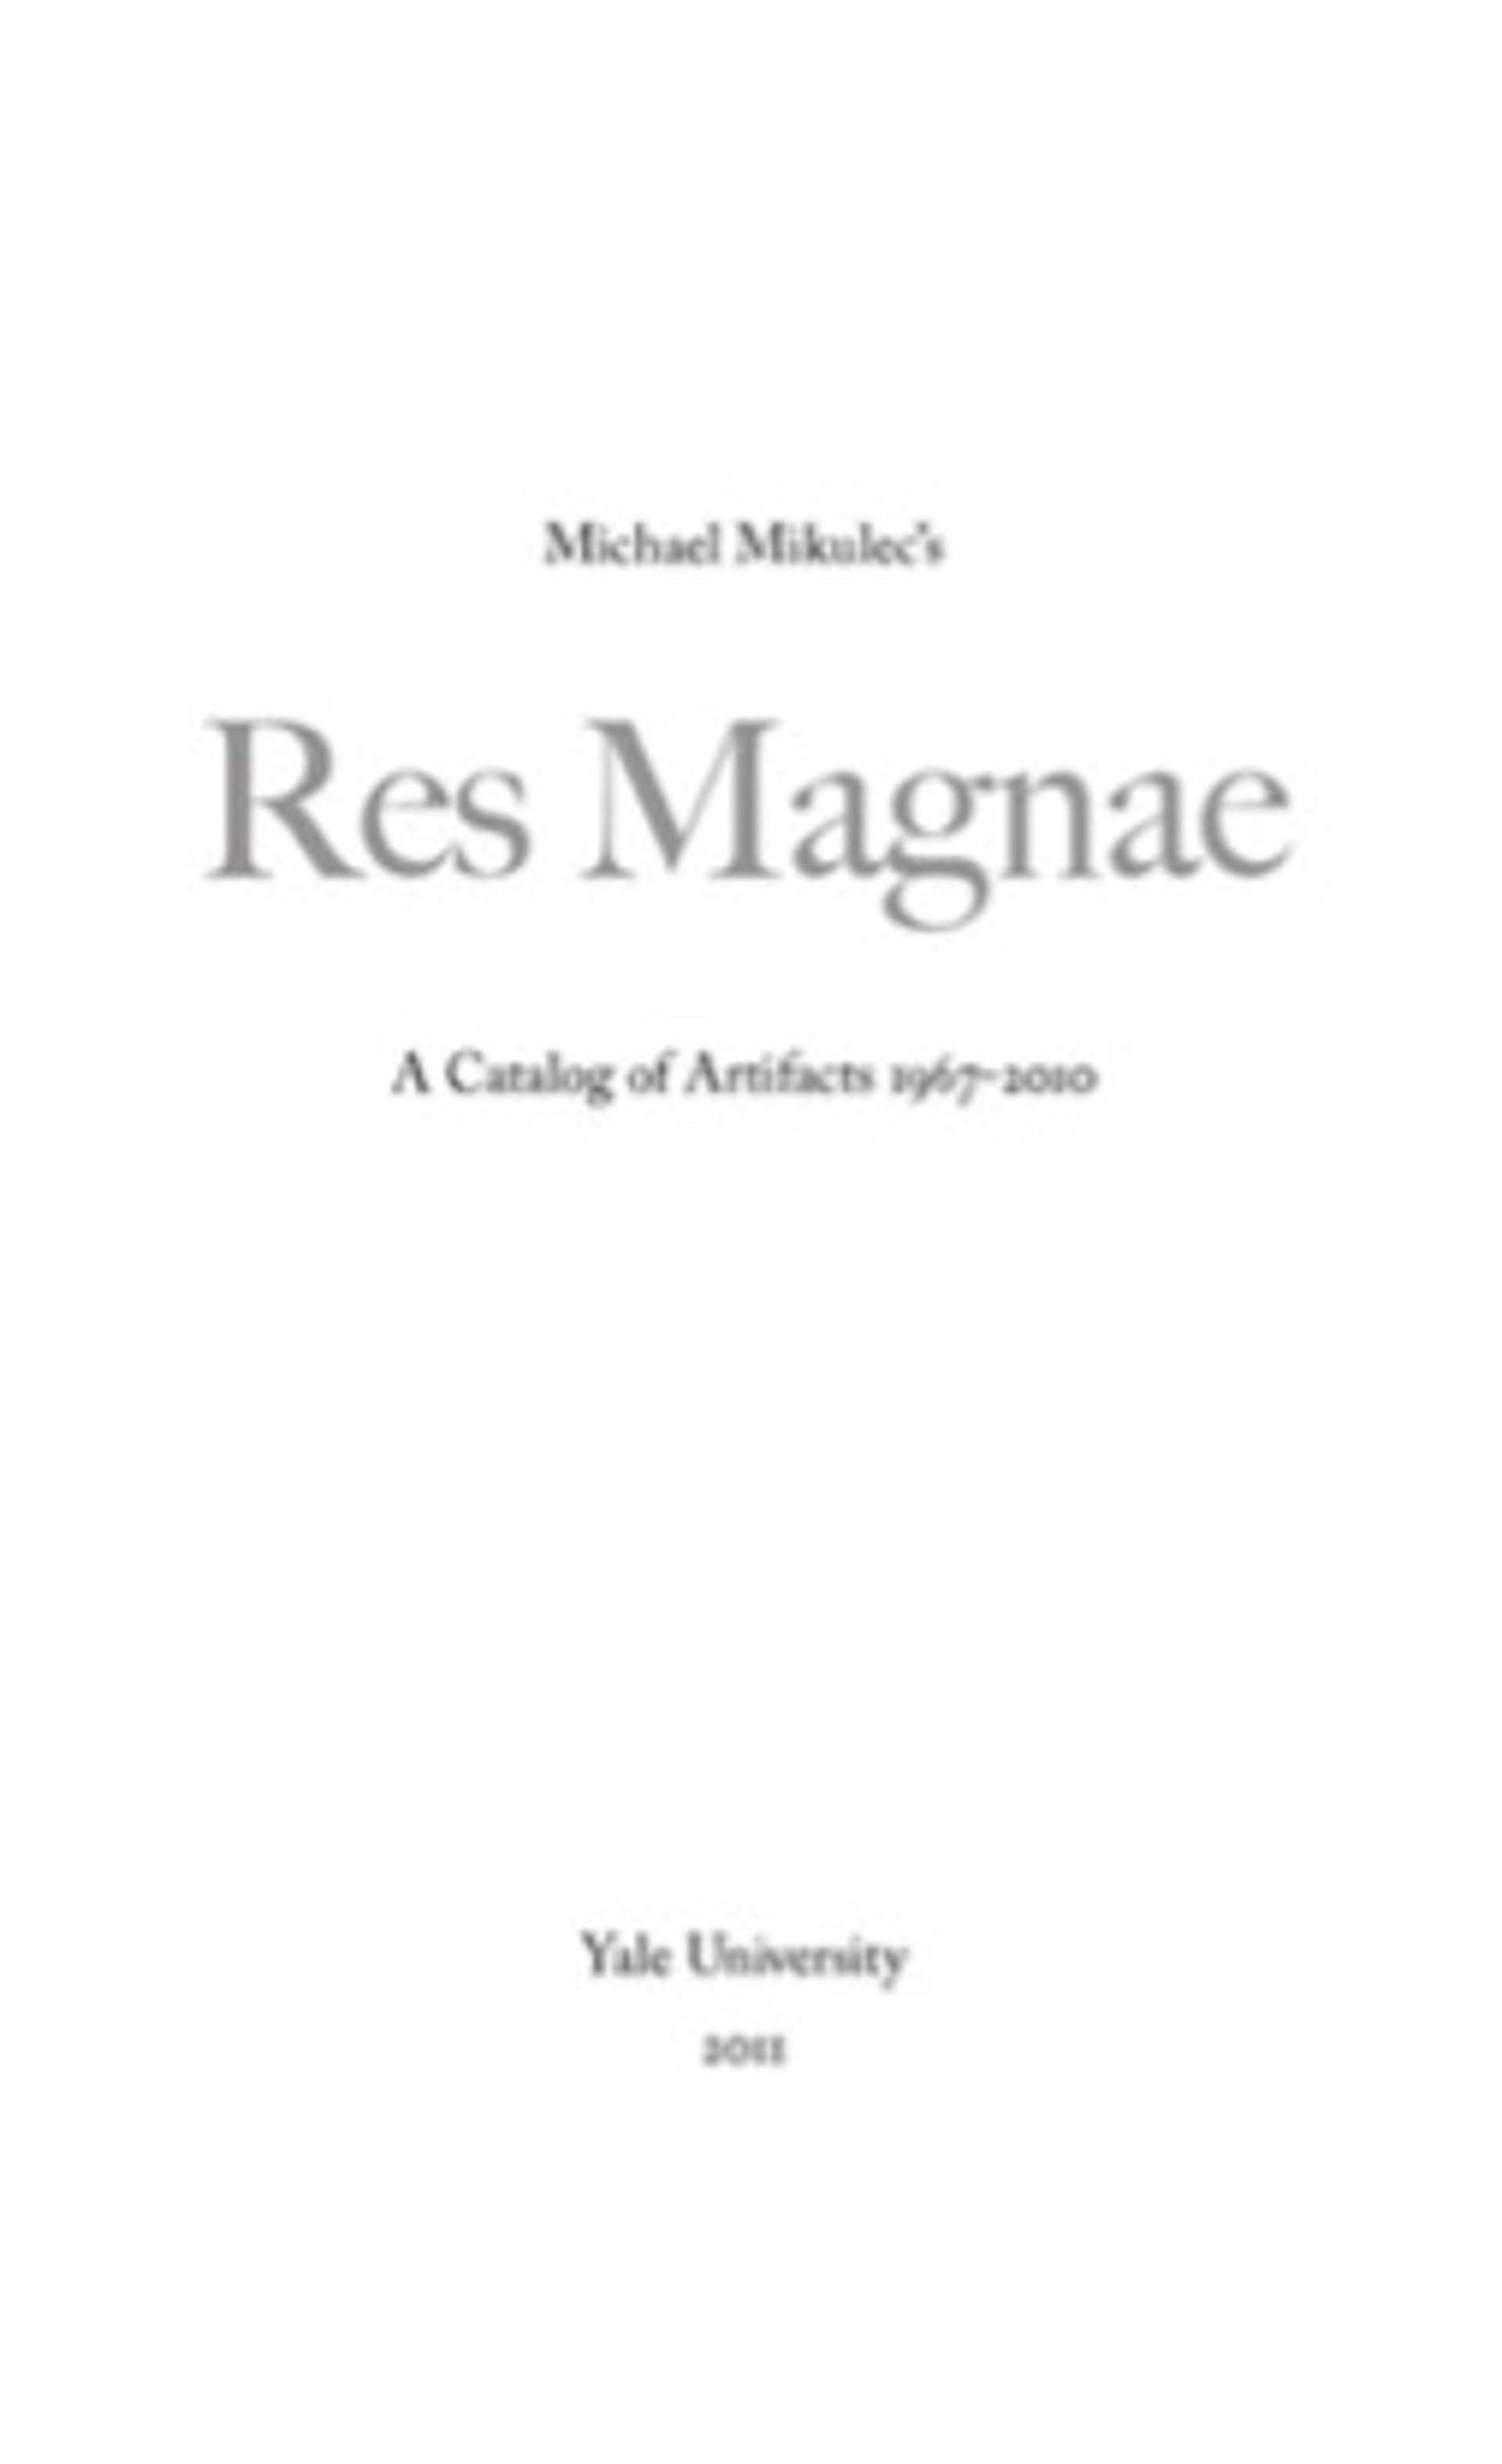 Res Magnae by Michael Mikulec